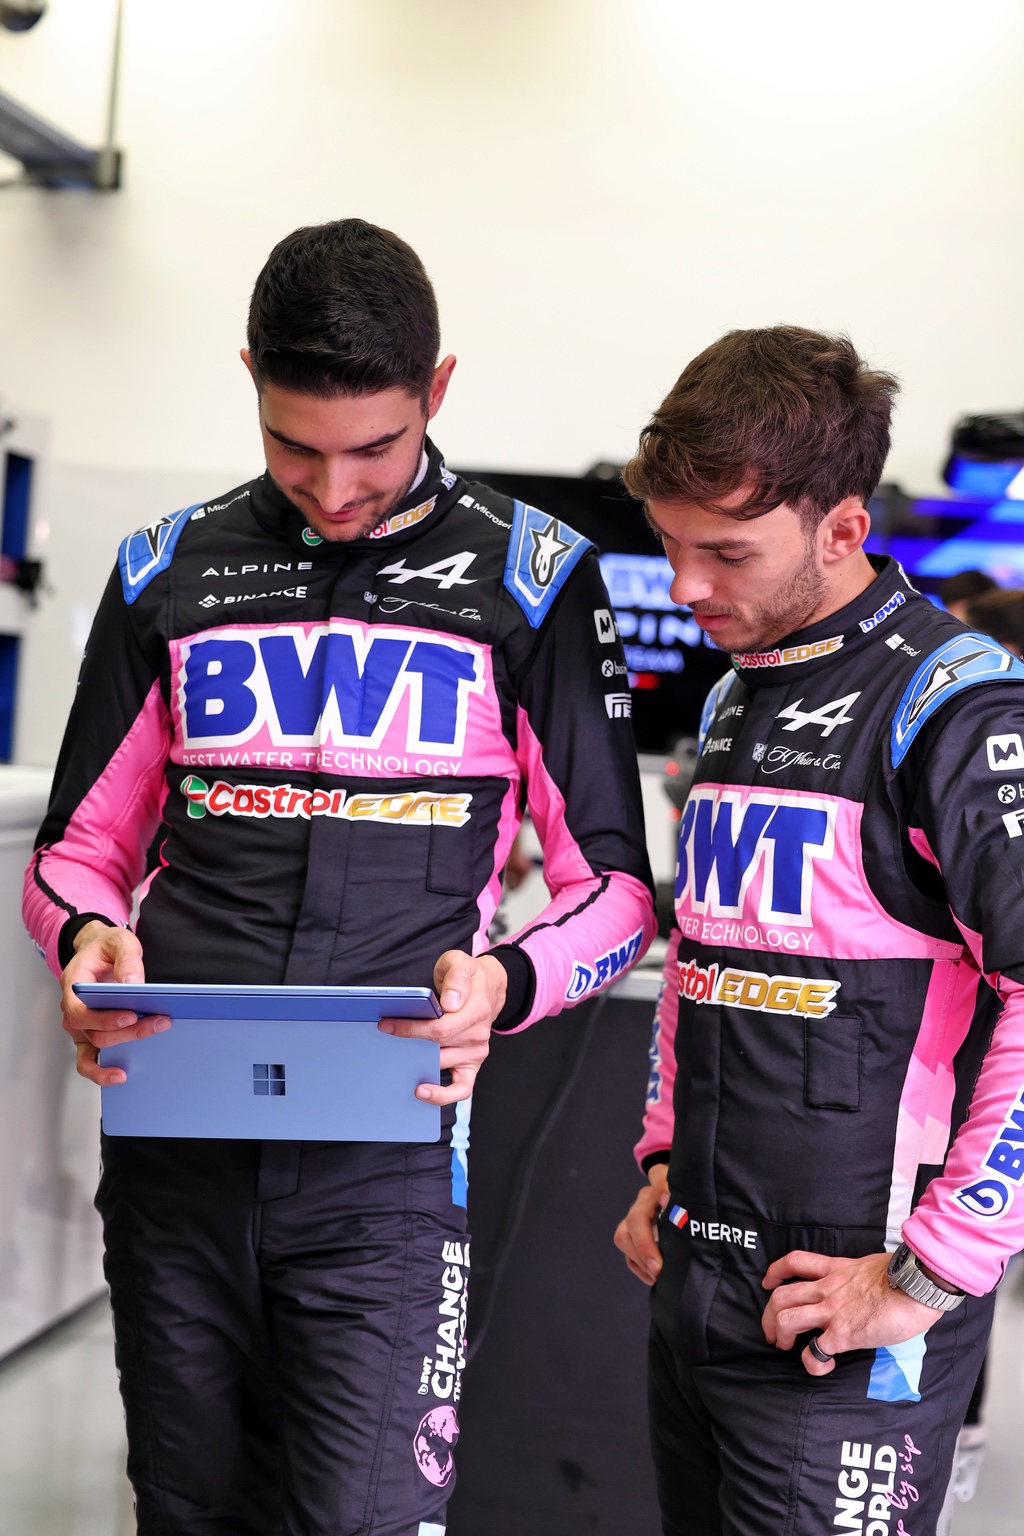 Two racing drivers looking at a tablet in a garage.